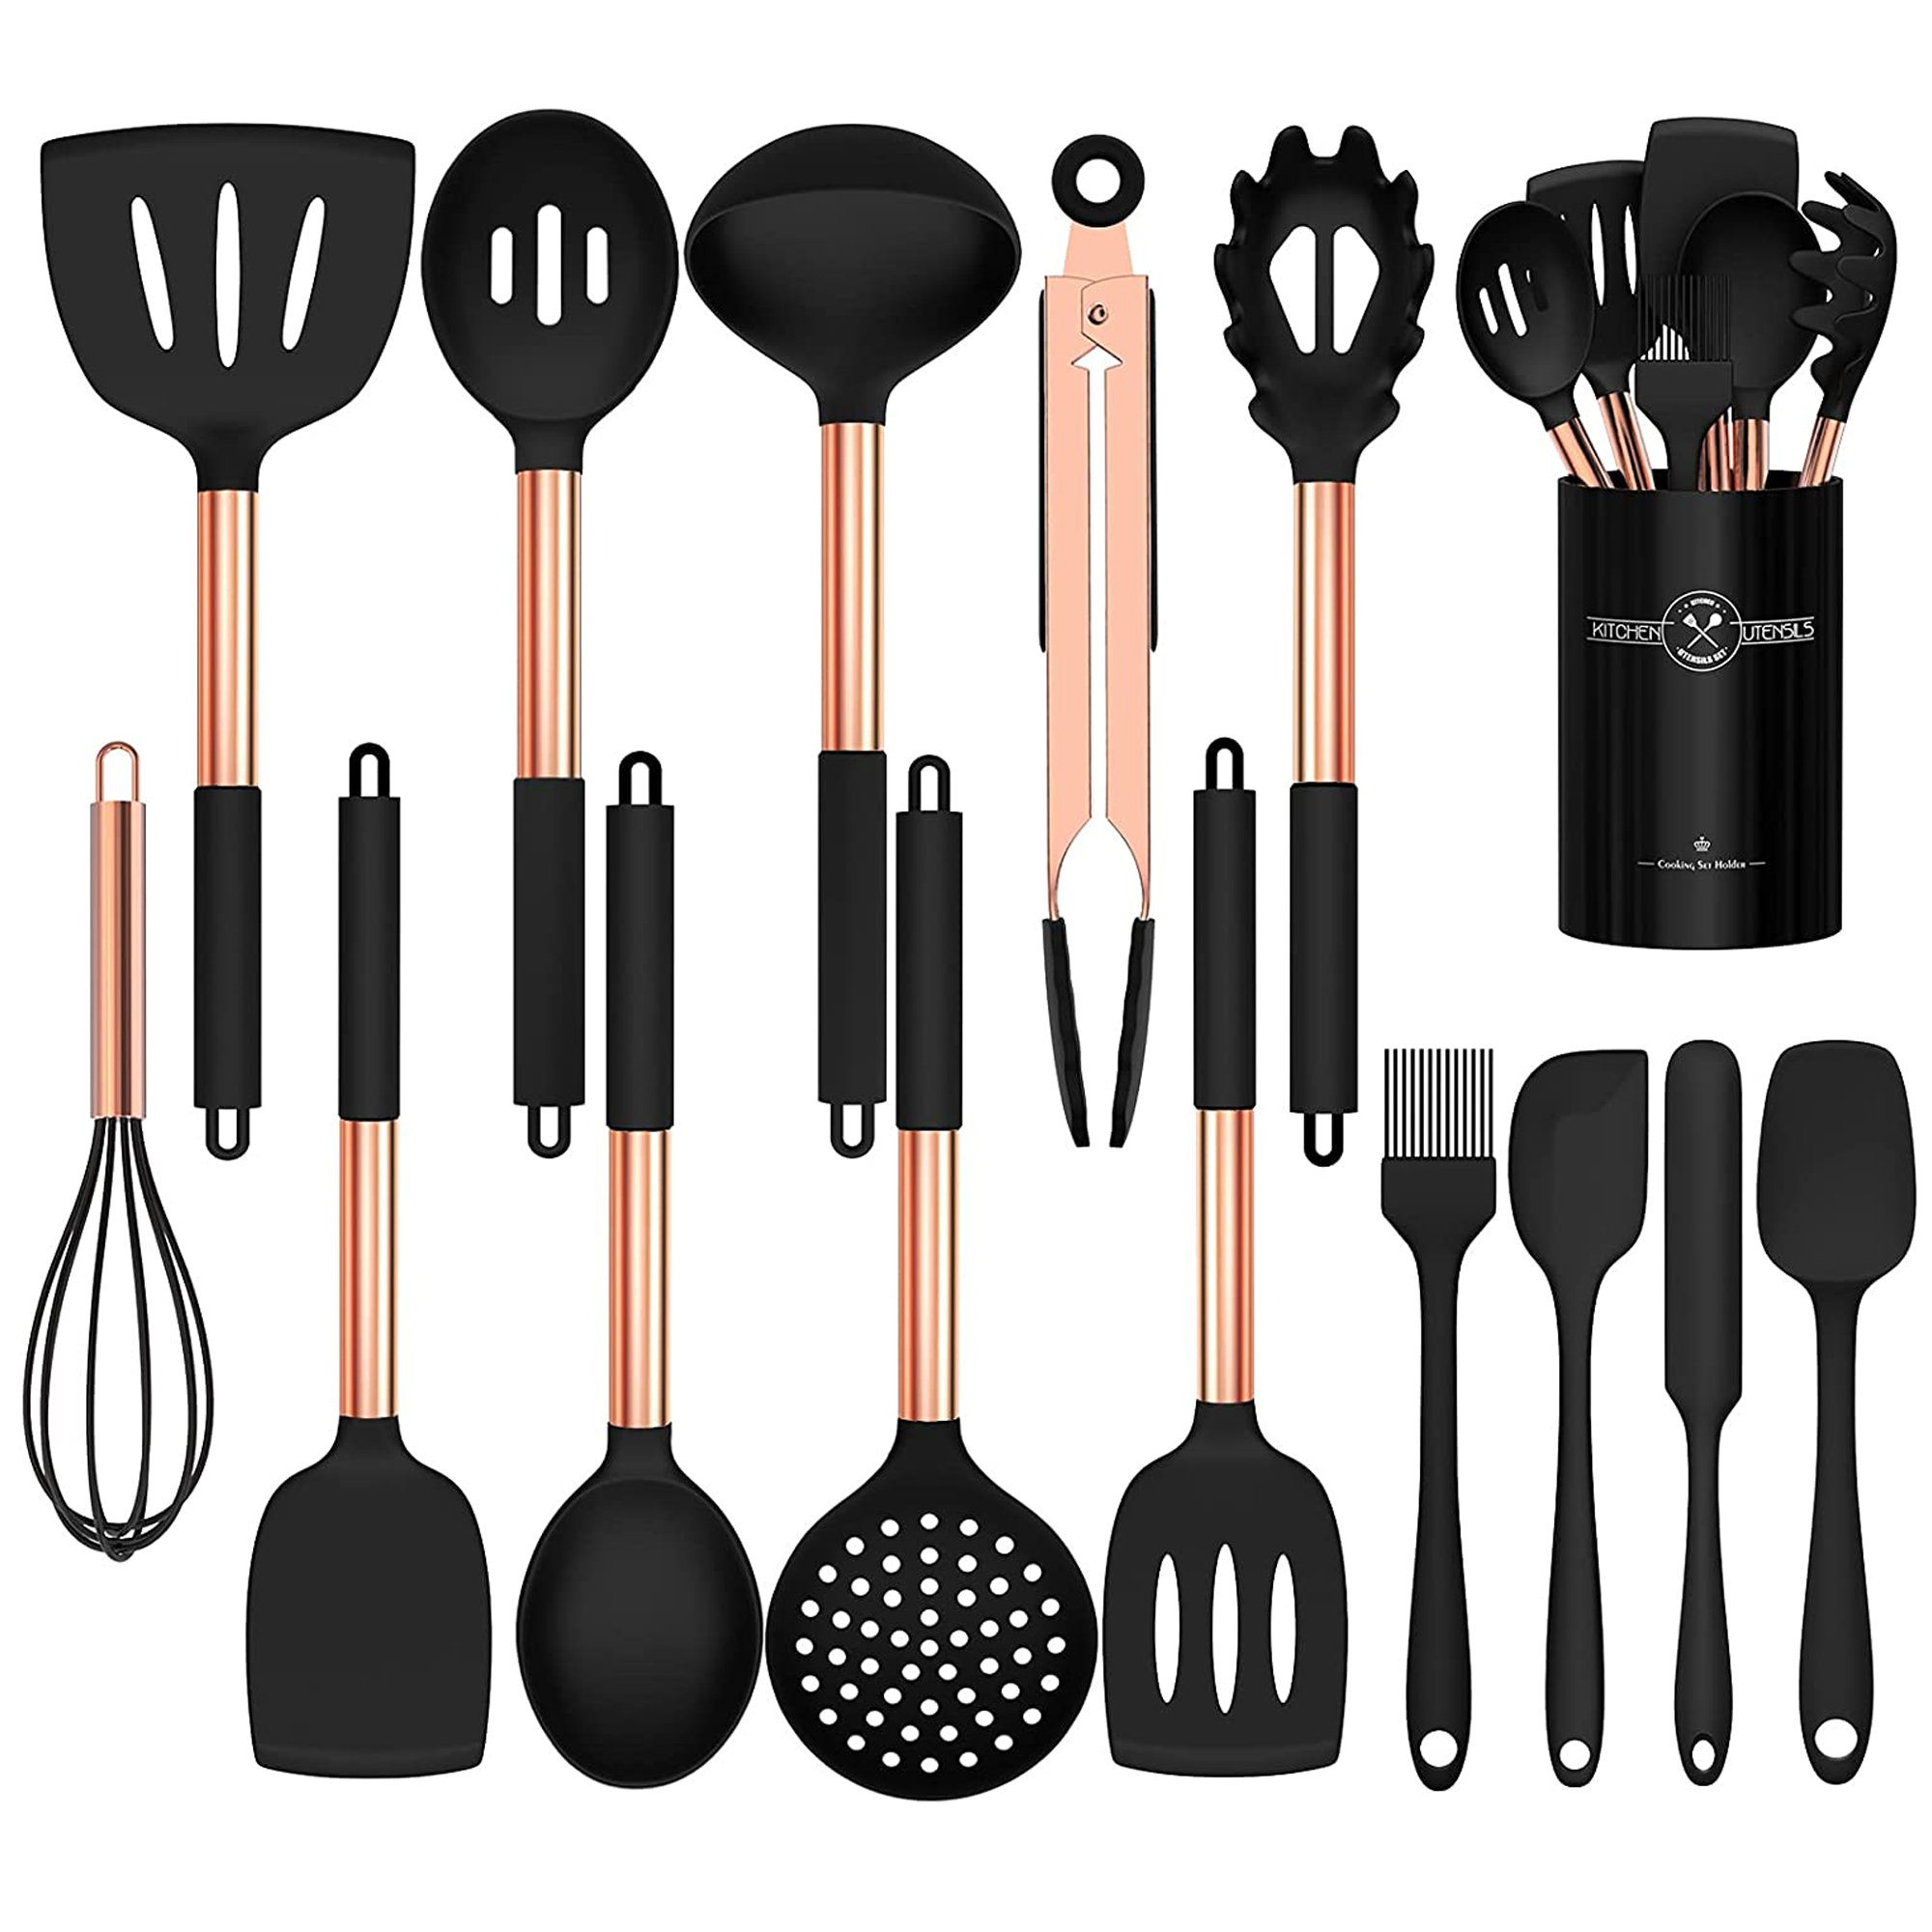 35 - Piece Cooking Spoon Set with Utensil Crock AIRPJ